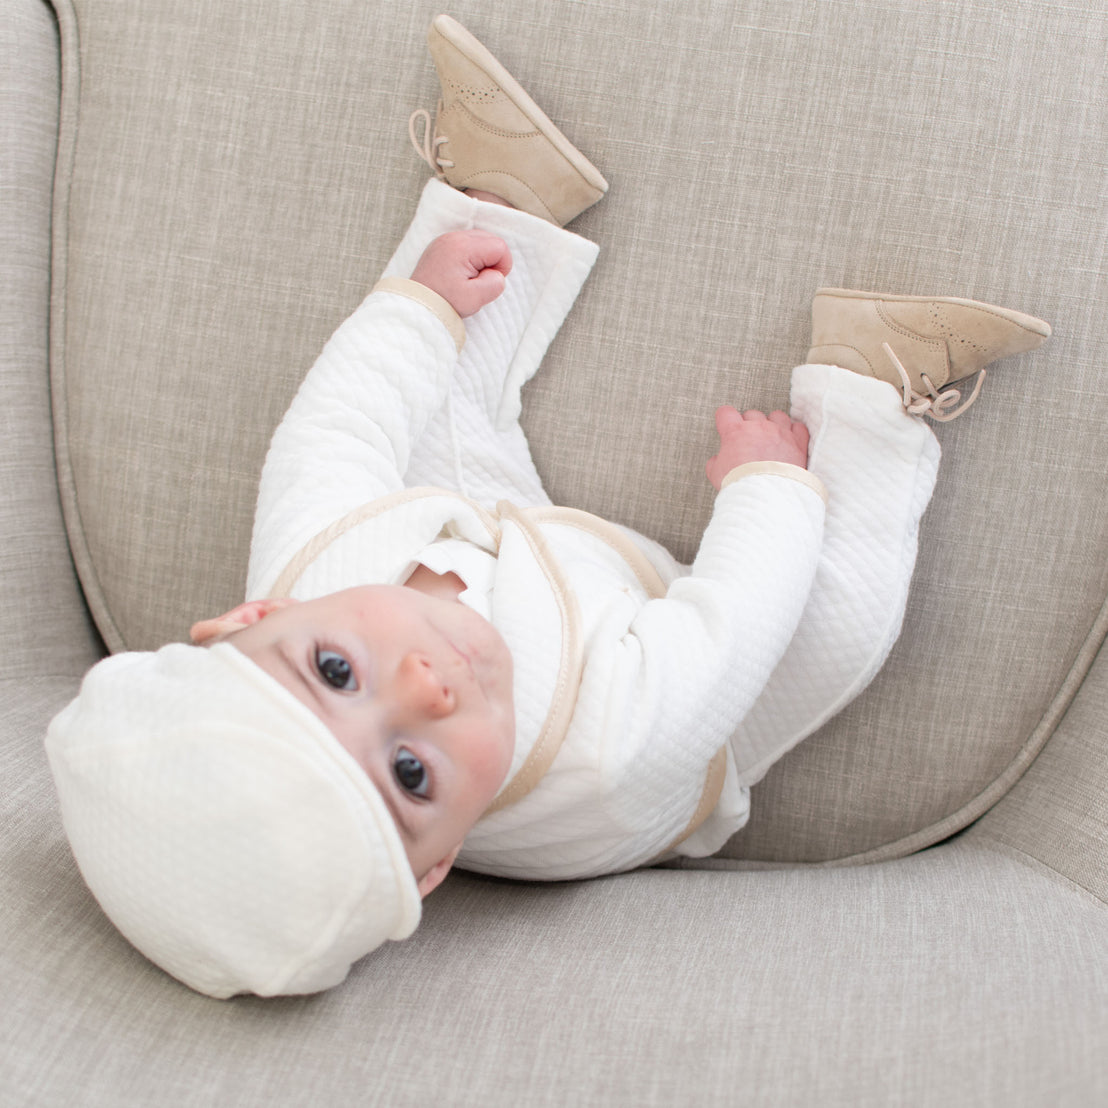 A baby dressed in a white outfit and hat lies on a gray sofa, looking up with wide blue eyes, wearing Camel Suede Shoes on its feet.